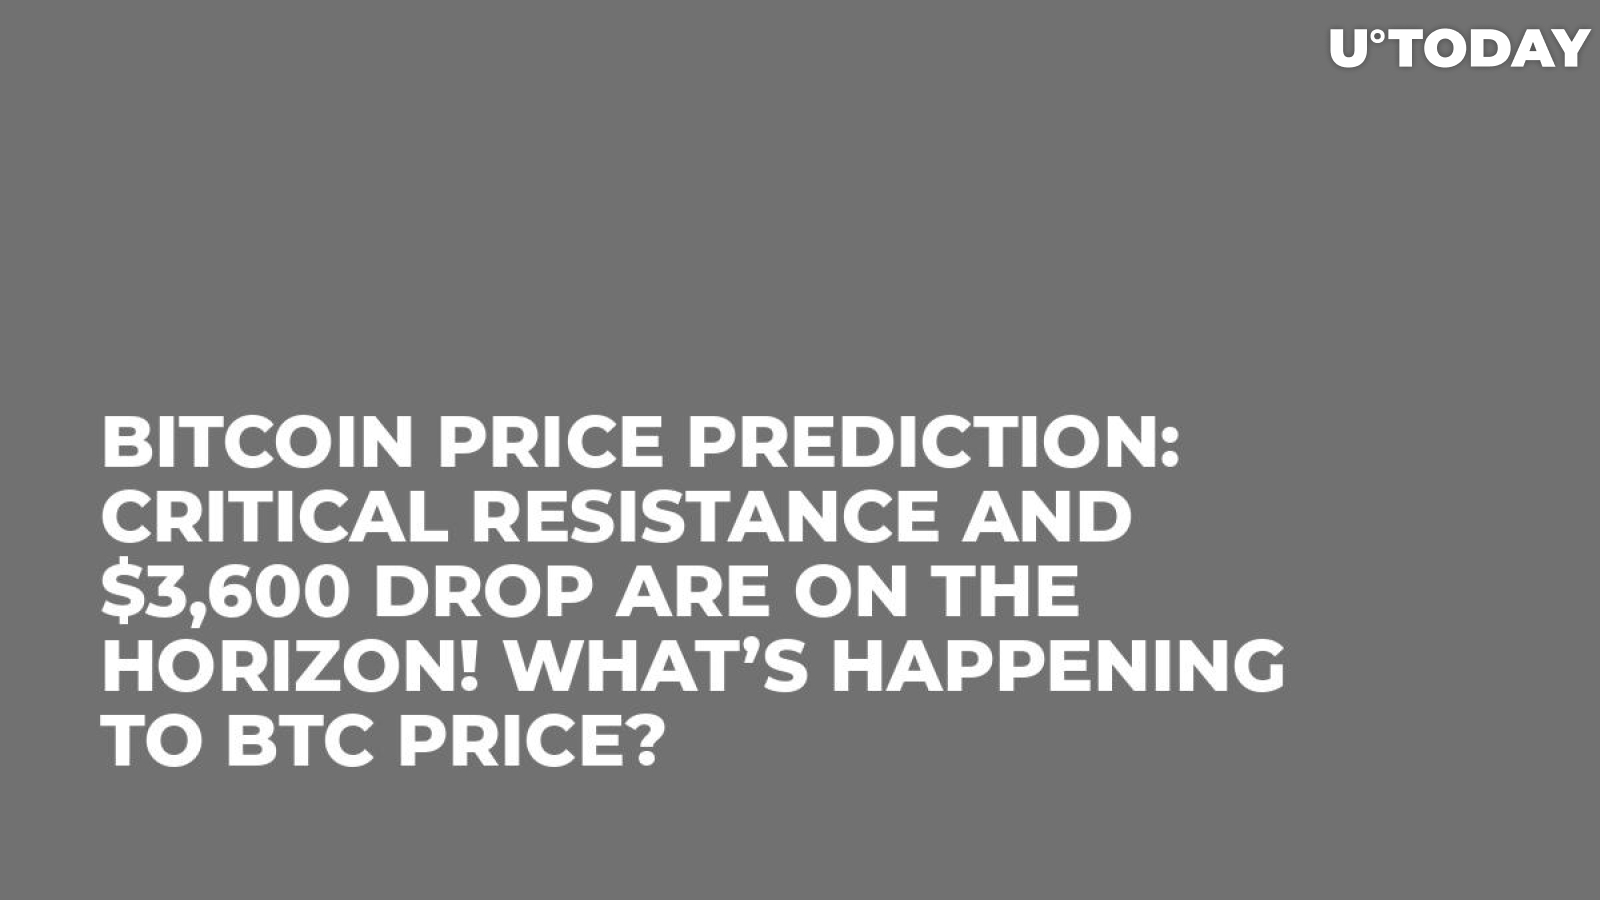 Bitcoin Price Prediction: Critical Resistance and $3,600 Drop Are on the Horizon! What’s Happening to BTC price?